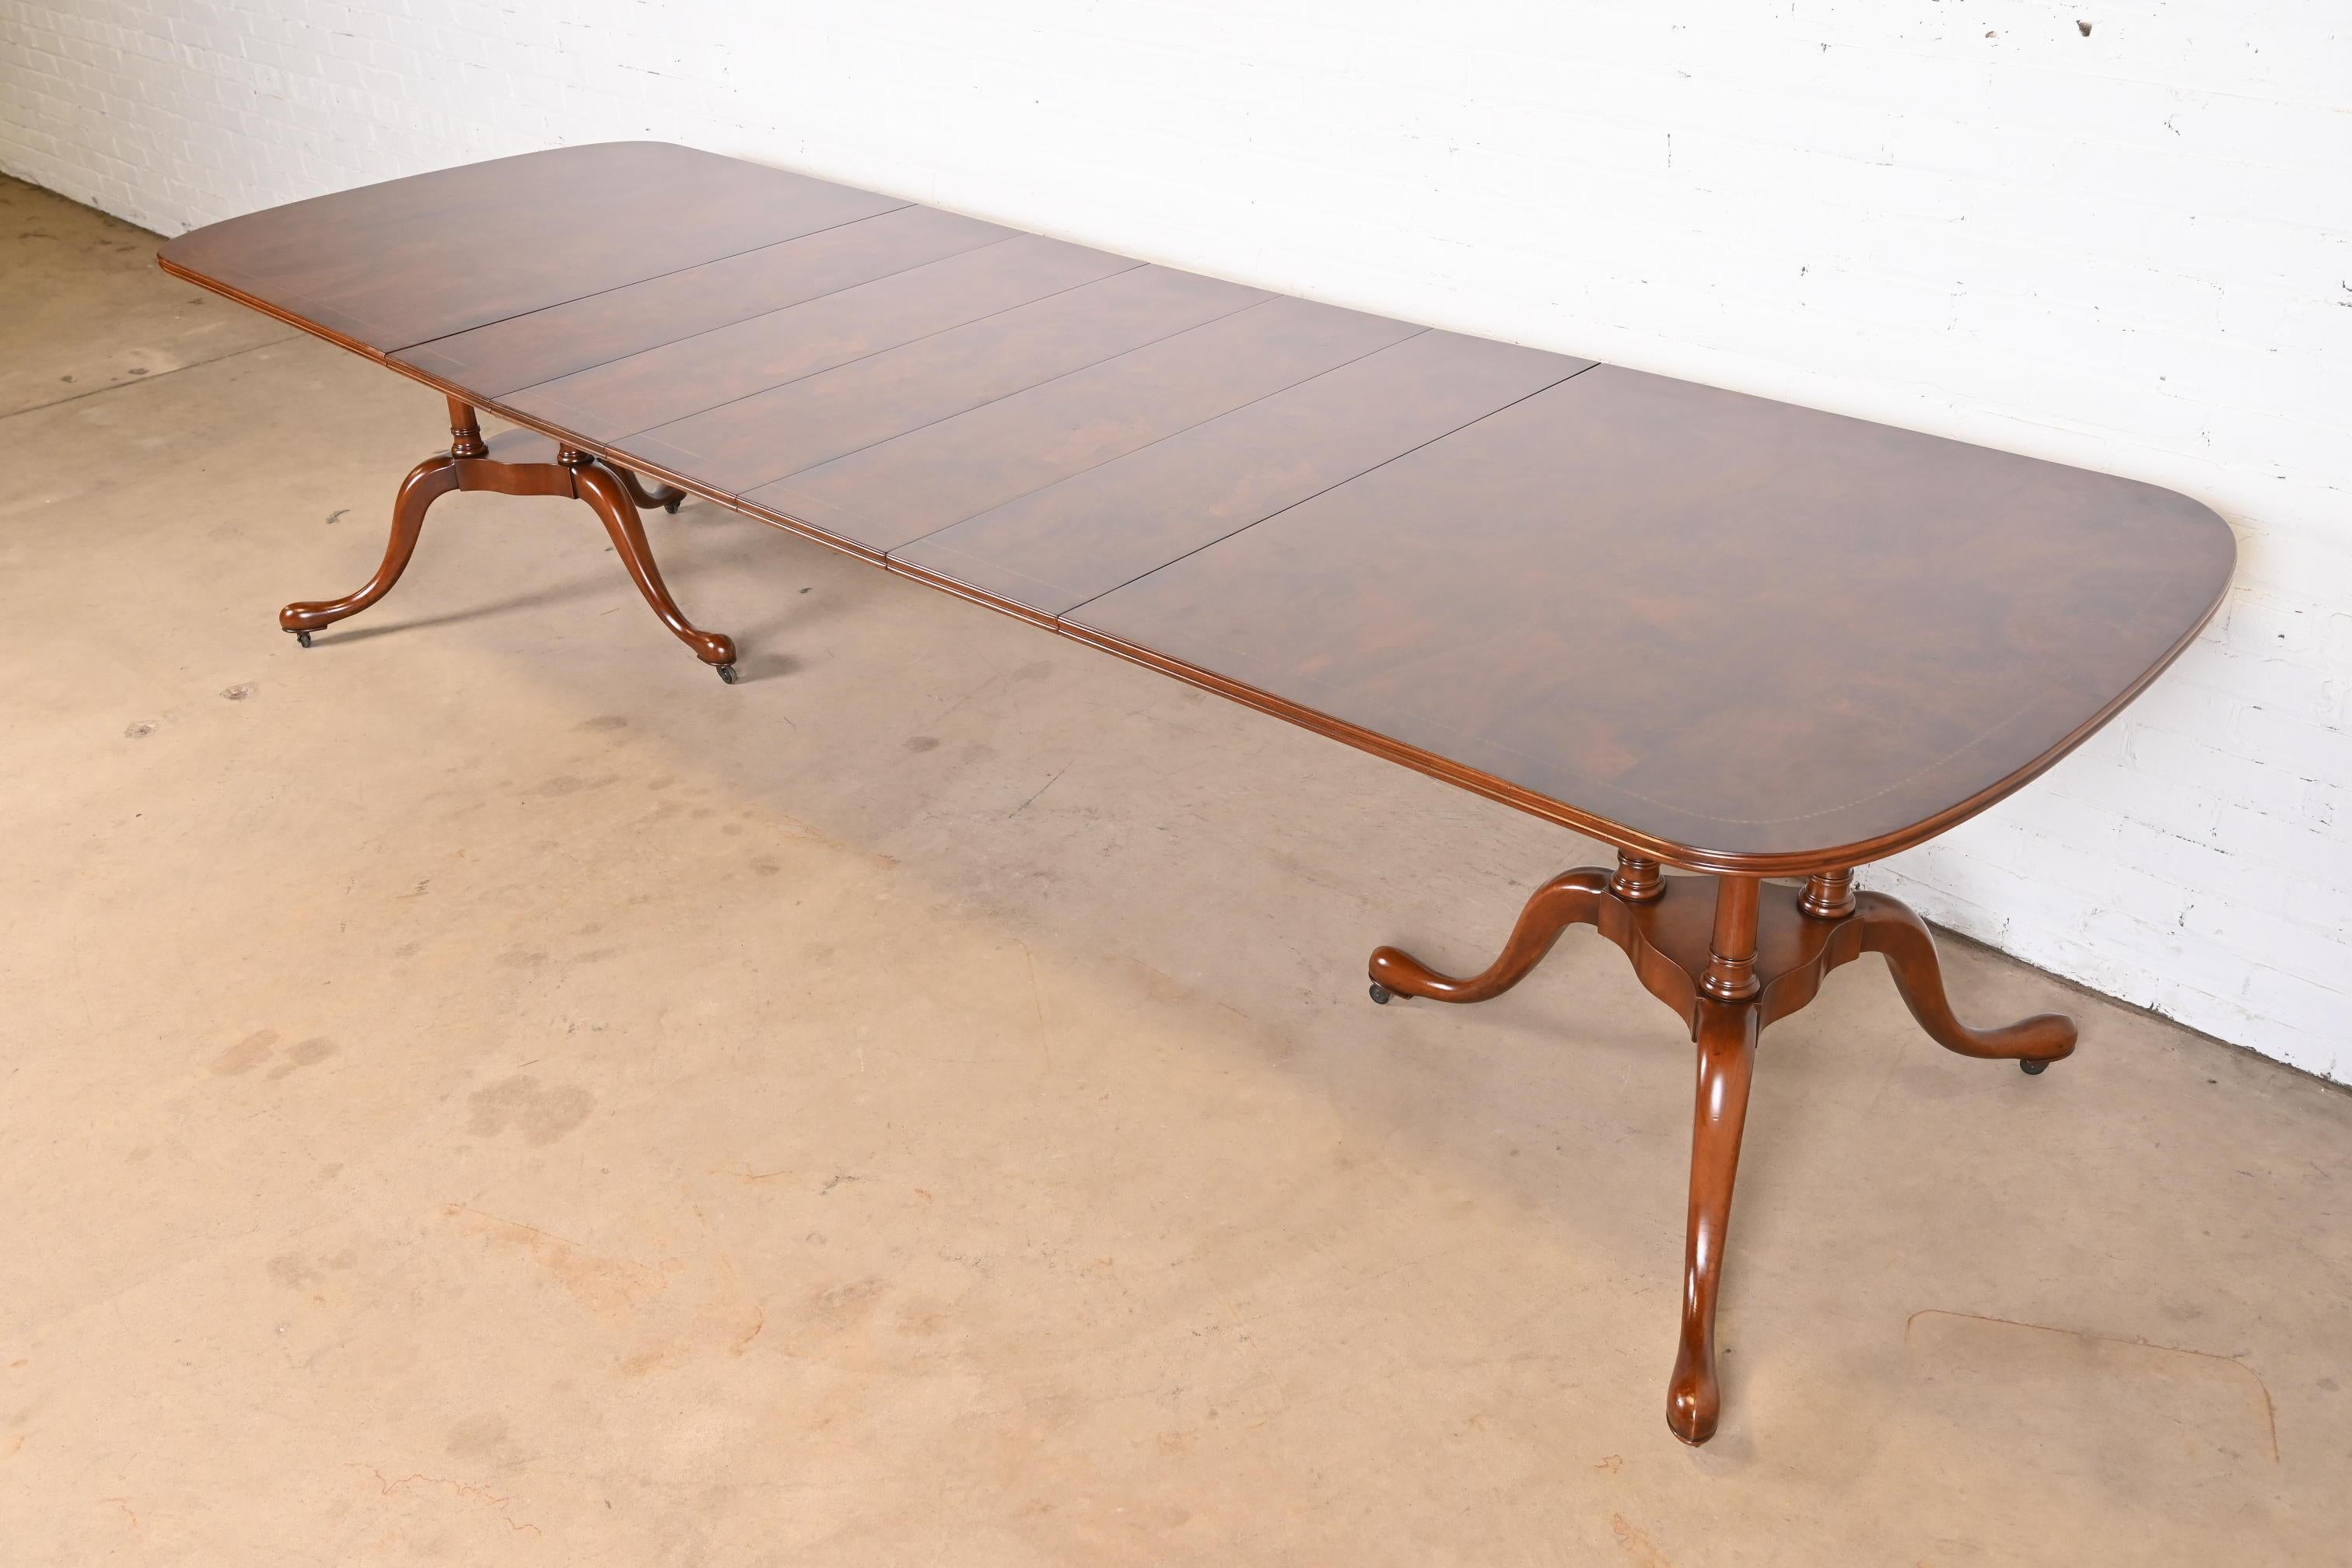 An exceptional Georgian, Chippendale, or Queen Anne style double pedestal extension dining table

By Robert W. Irwin Co.

USA, Circa 1940s

Stunning carved mahogany and burl wood top, with solid mahogany pedestals on casters.

Measures: 71.75